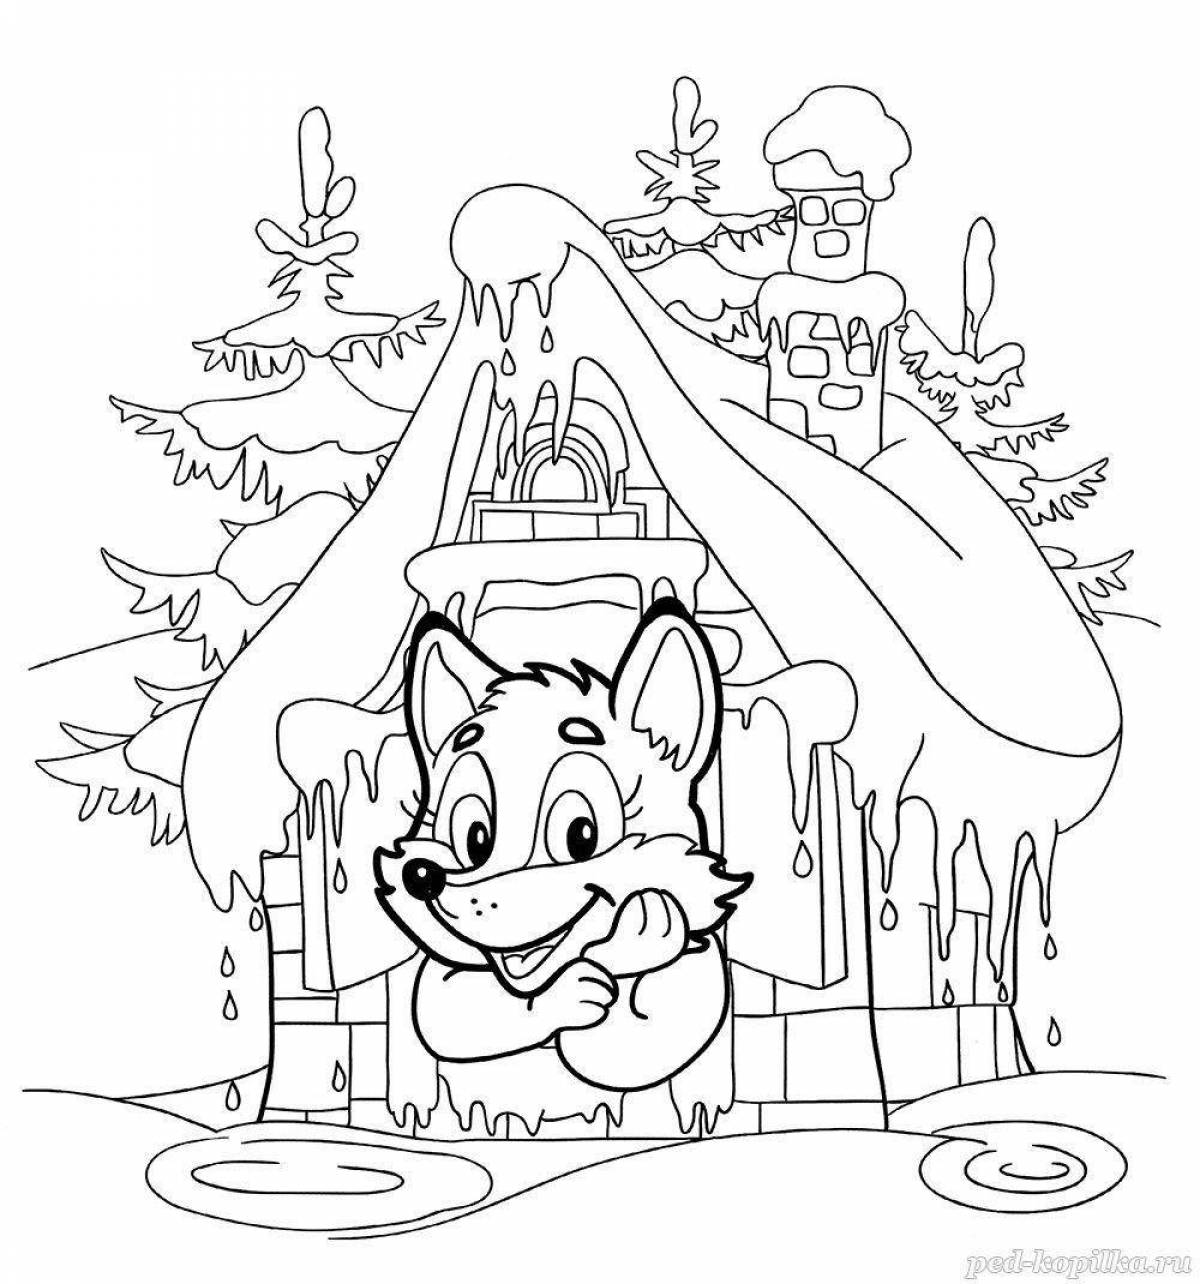 Fabulous bast and ice hut coloring page